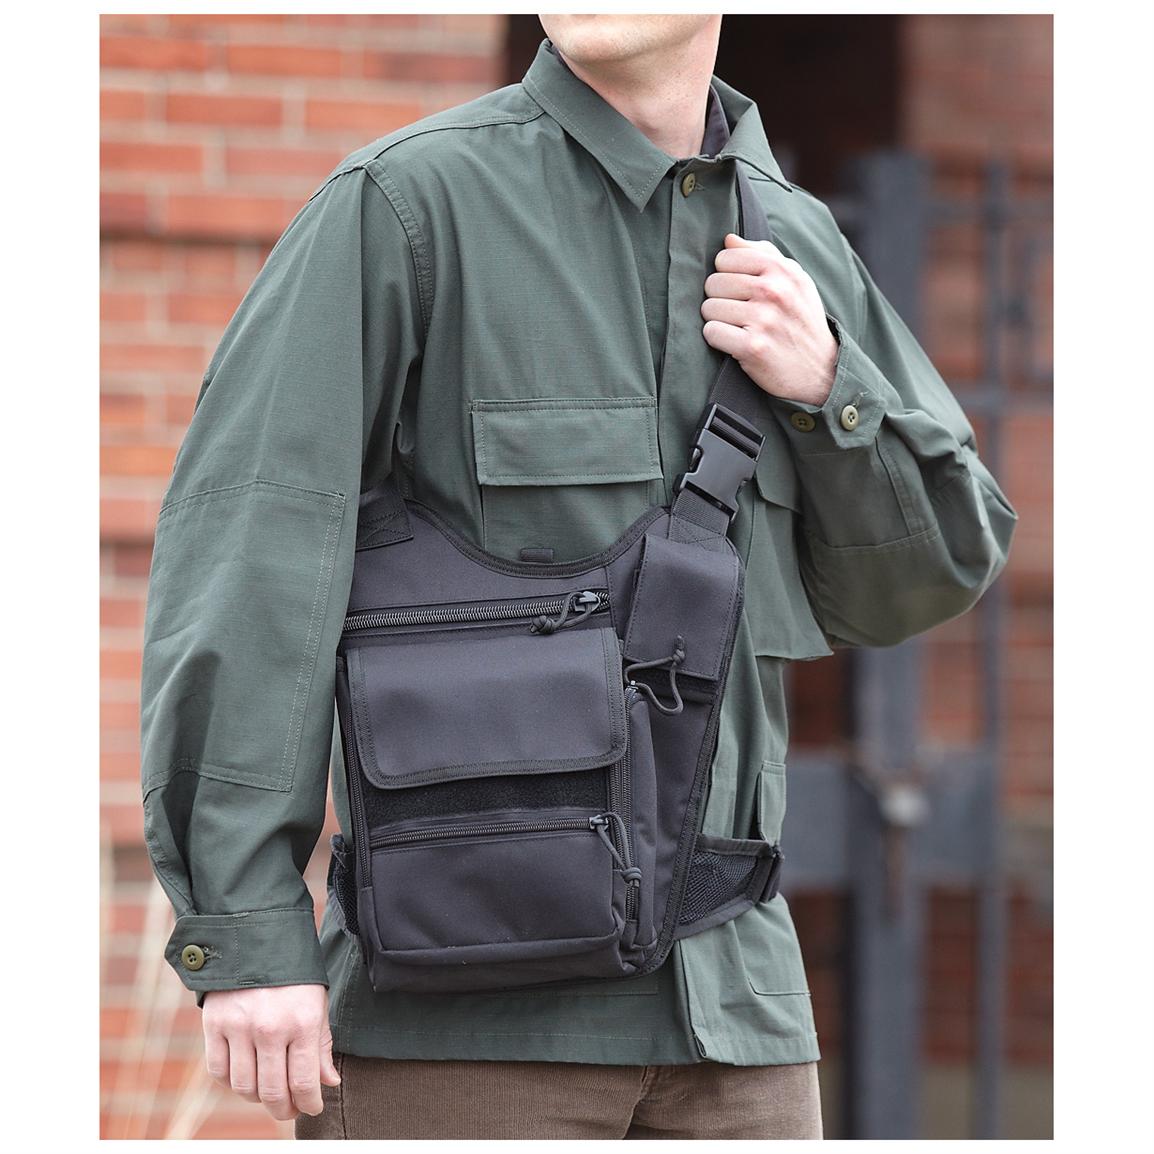 Voodoo Tactical Tablet Sling Bag - 293745, Military Style Backpacks & Bags at Sportsman&#39;s Guide